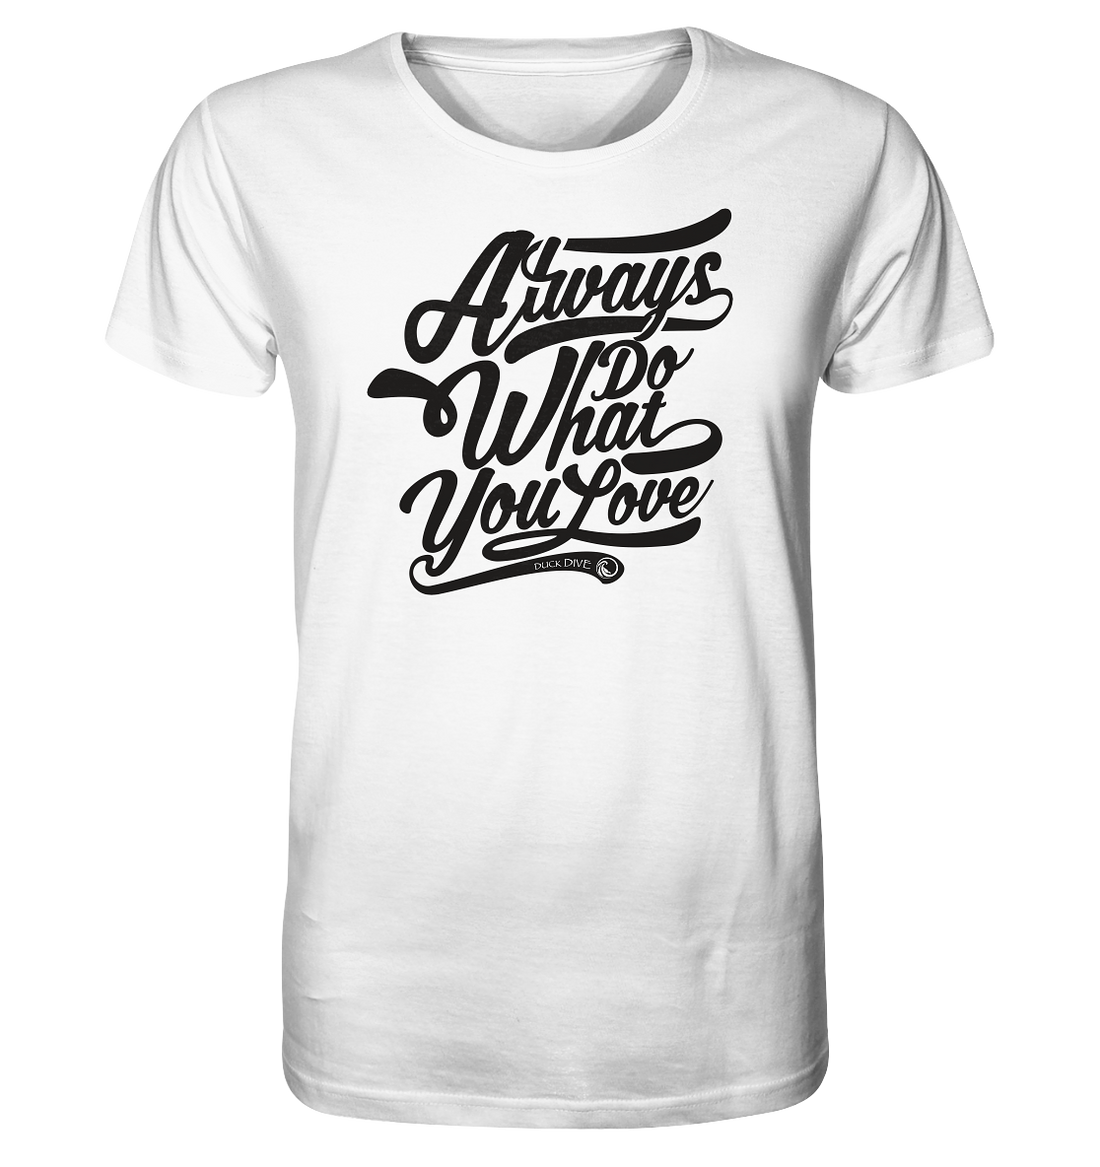 Always do what you Love - Organic Shirt - Duck Dive Clothing